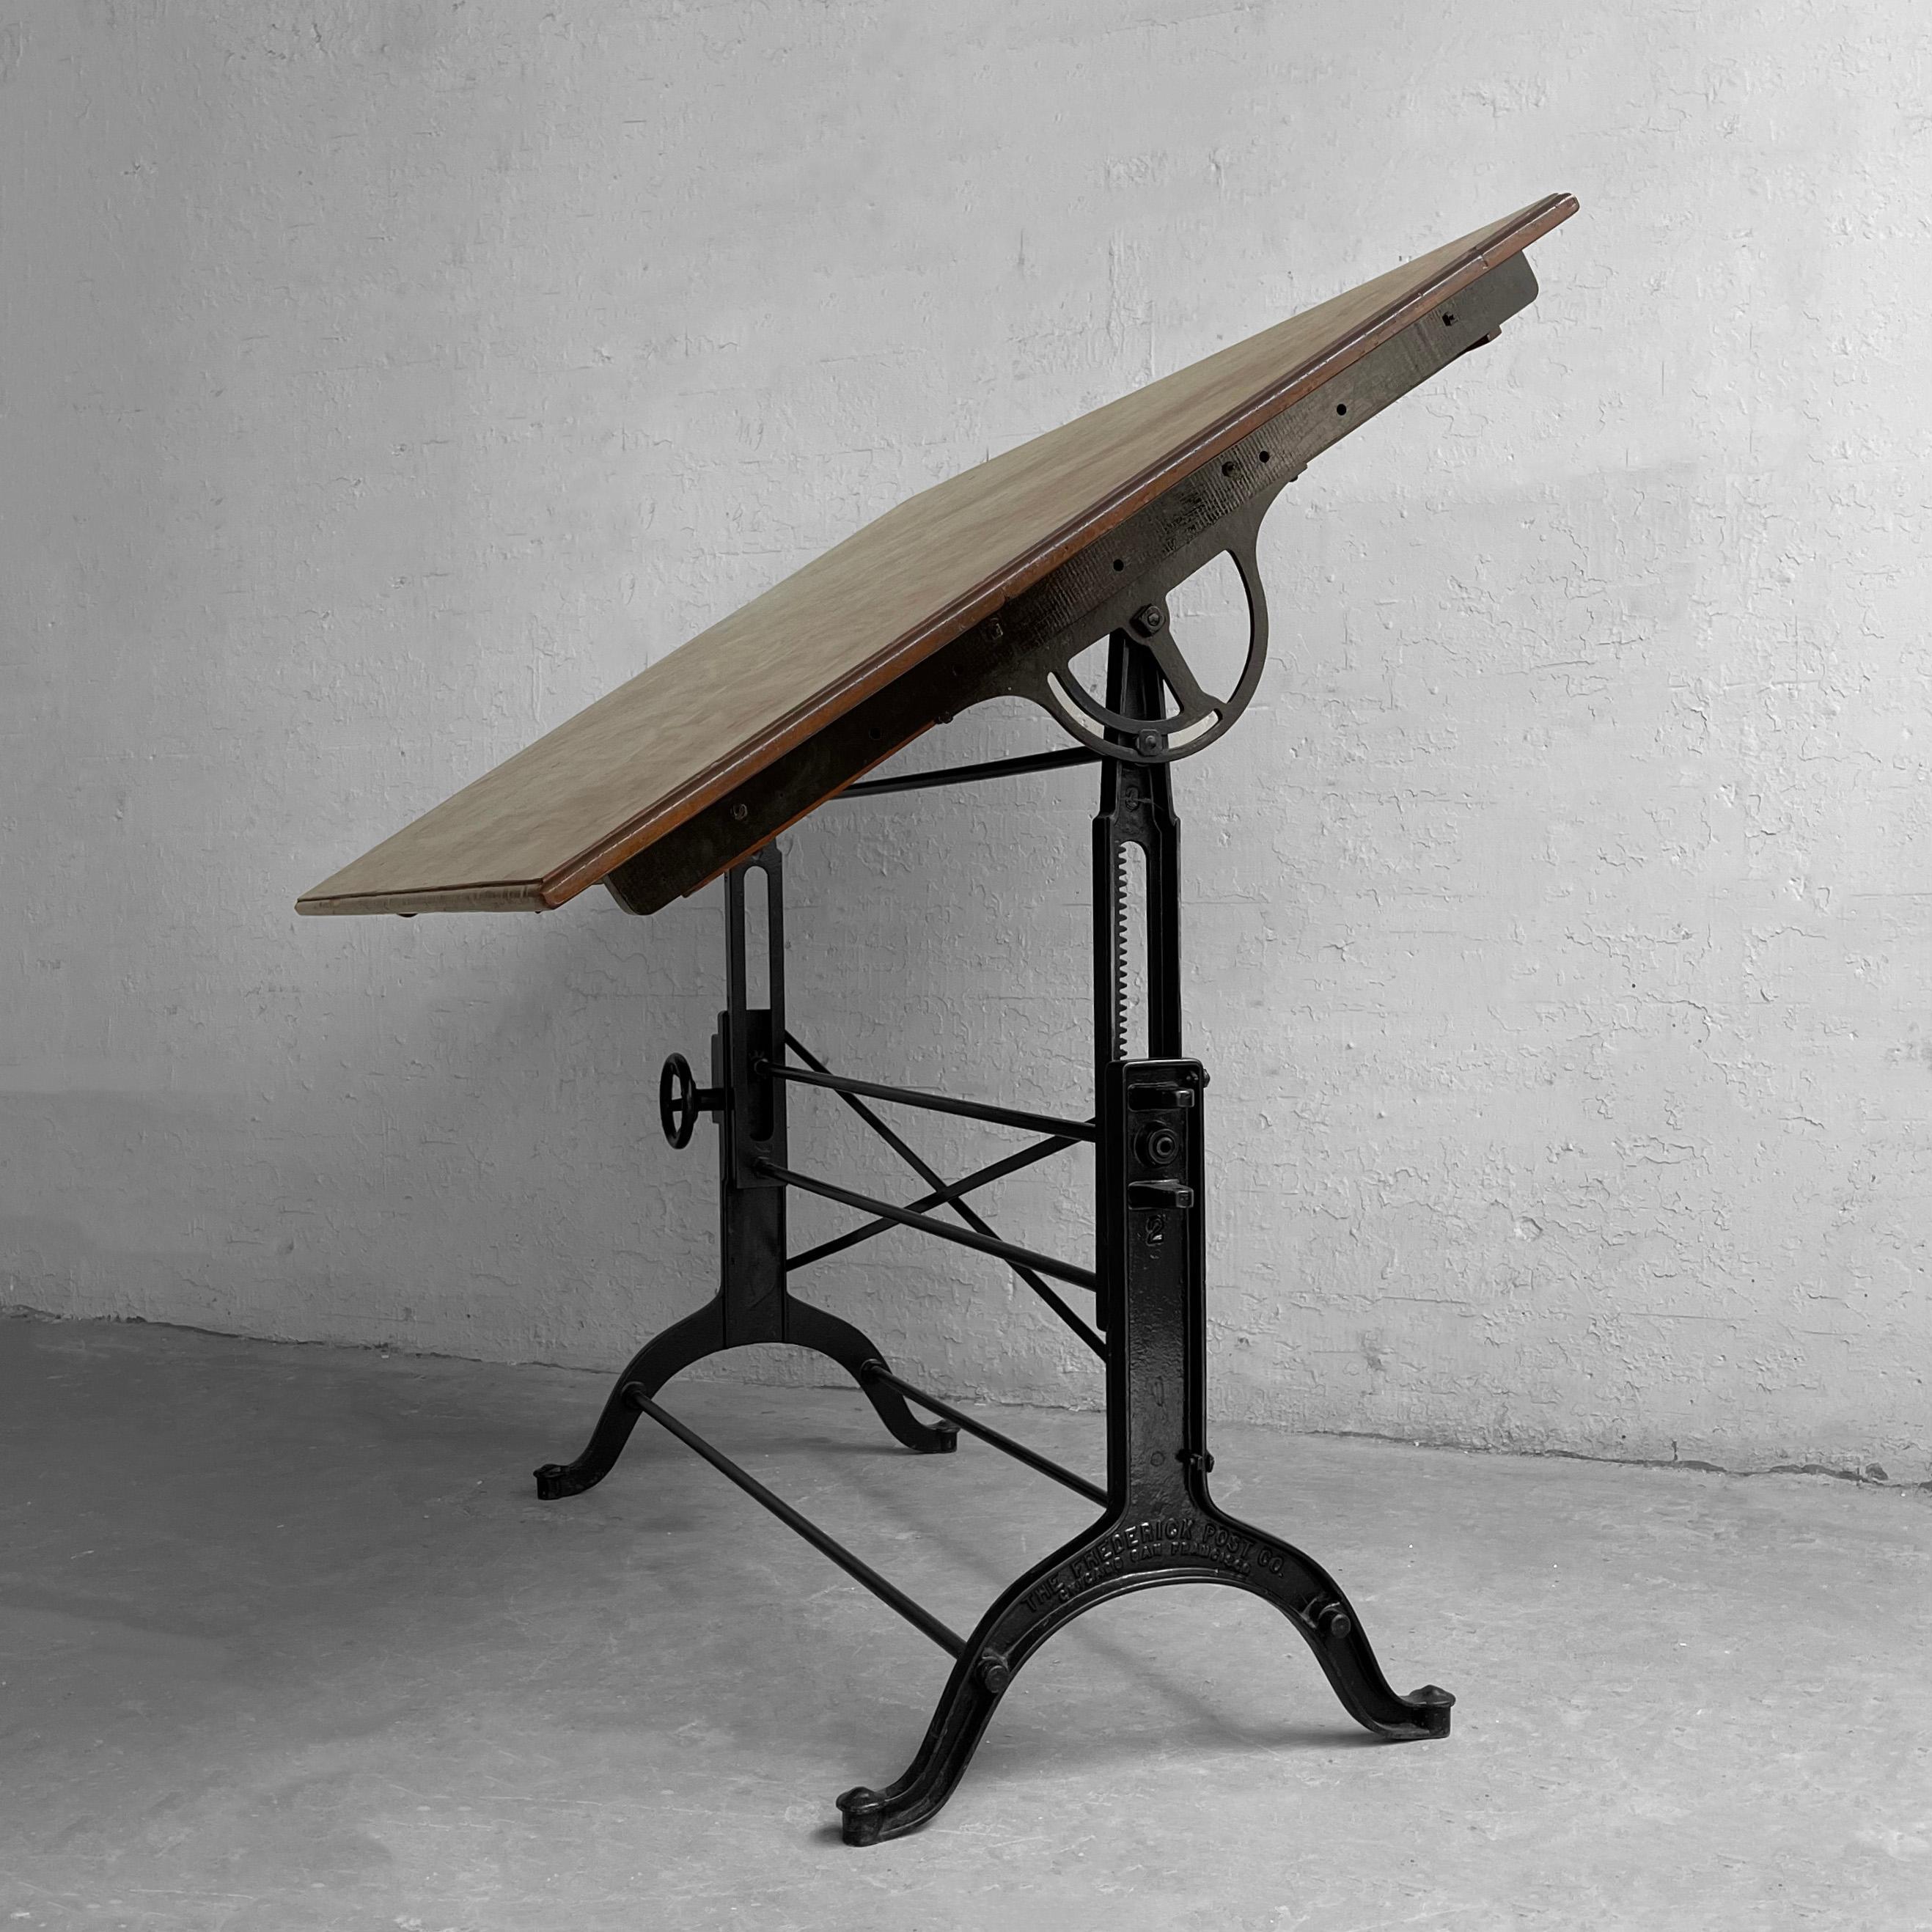 American Early 20th Century Cast Iron Maple Drafting Table by Frederick Post Co